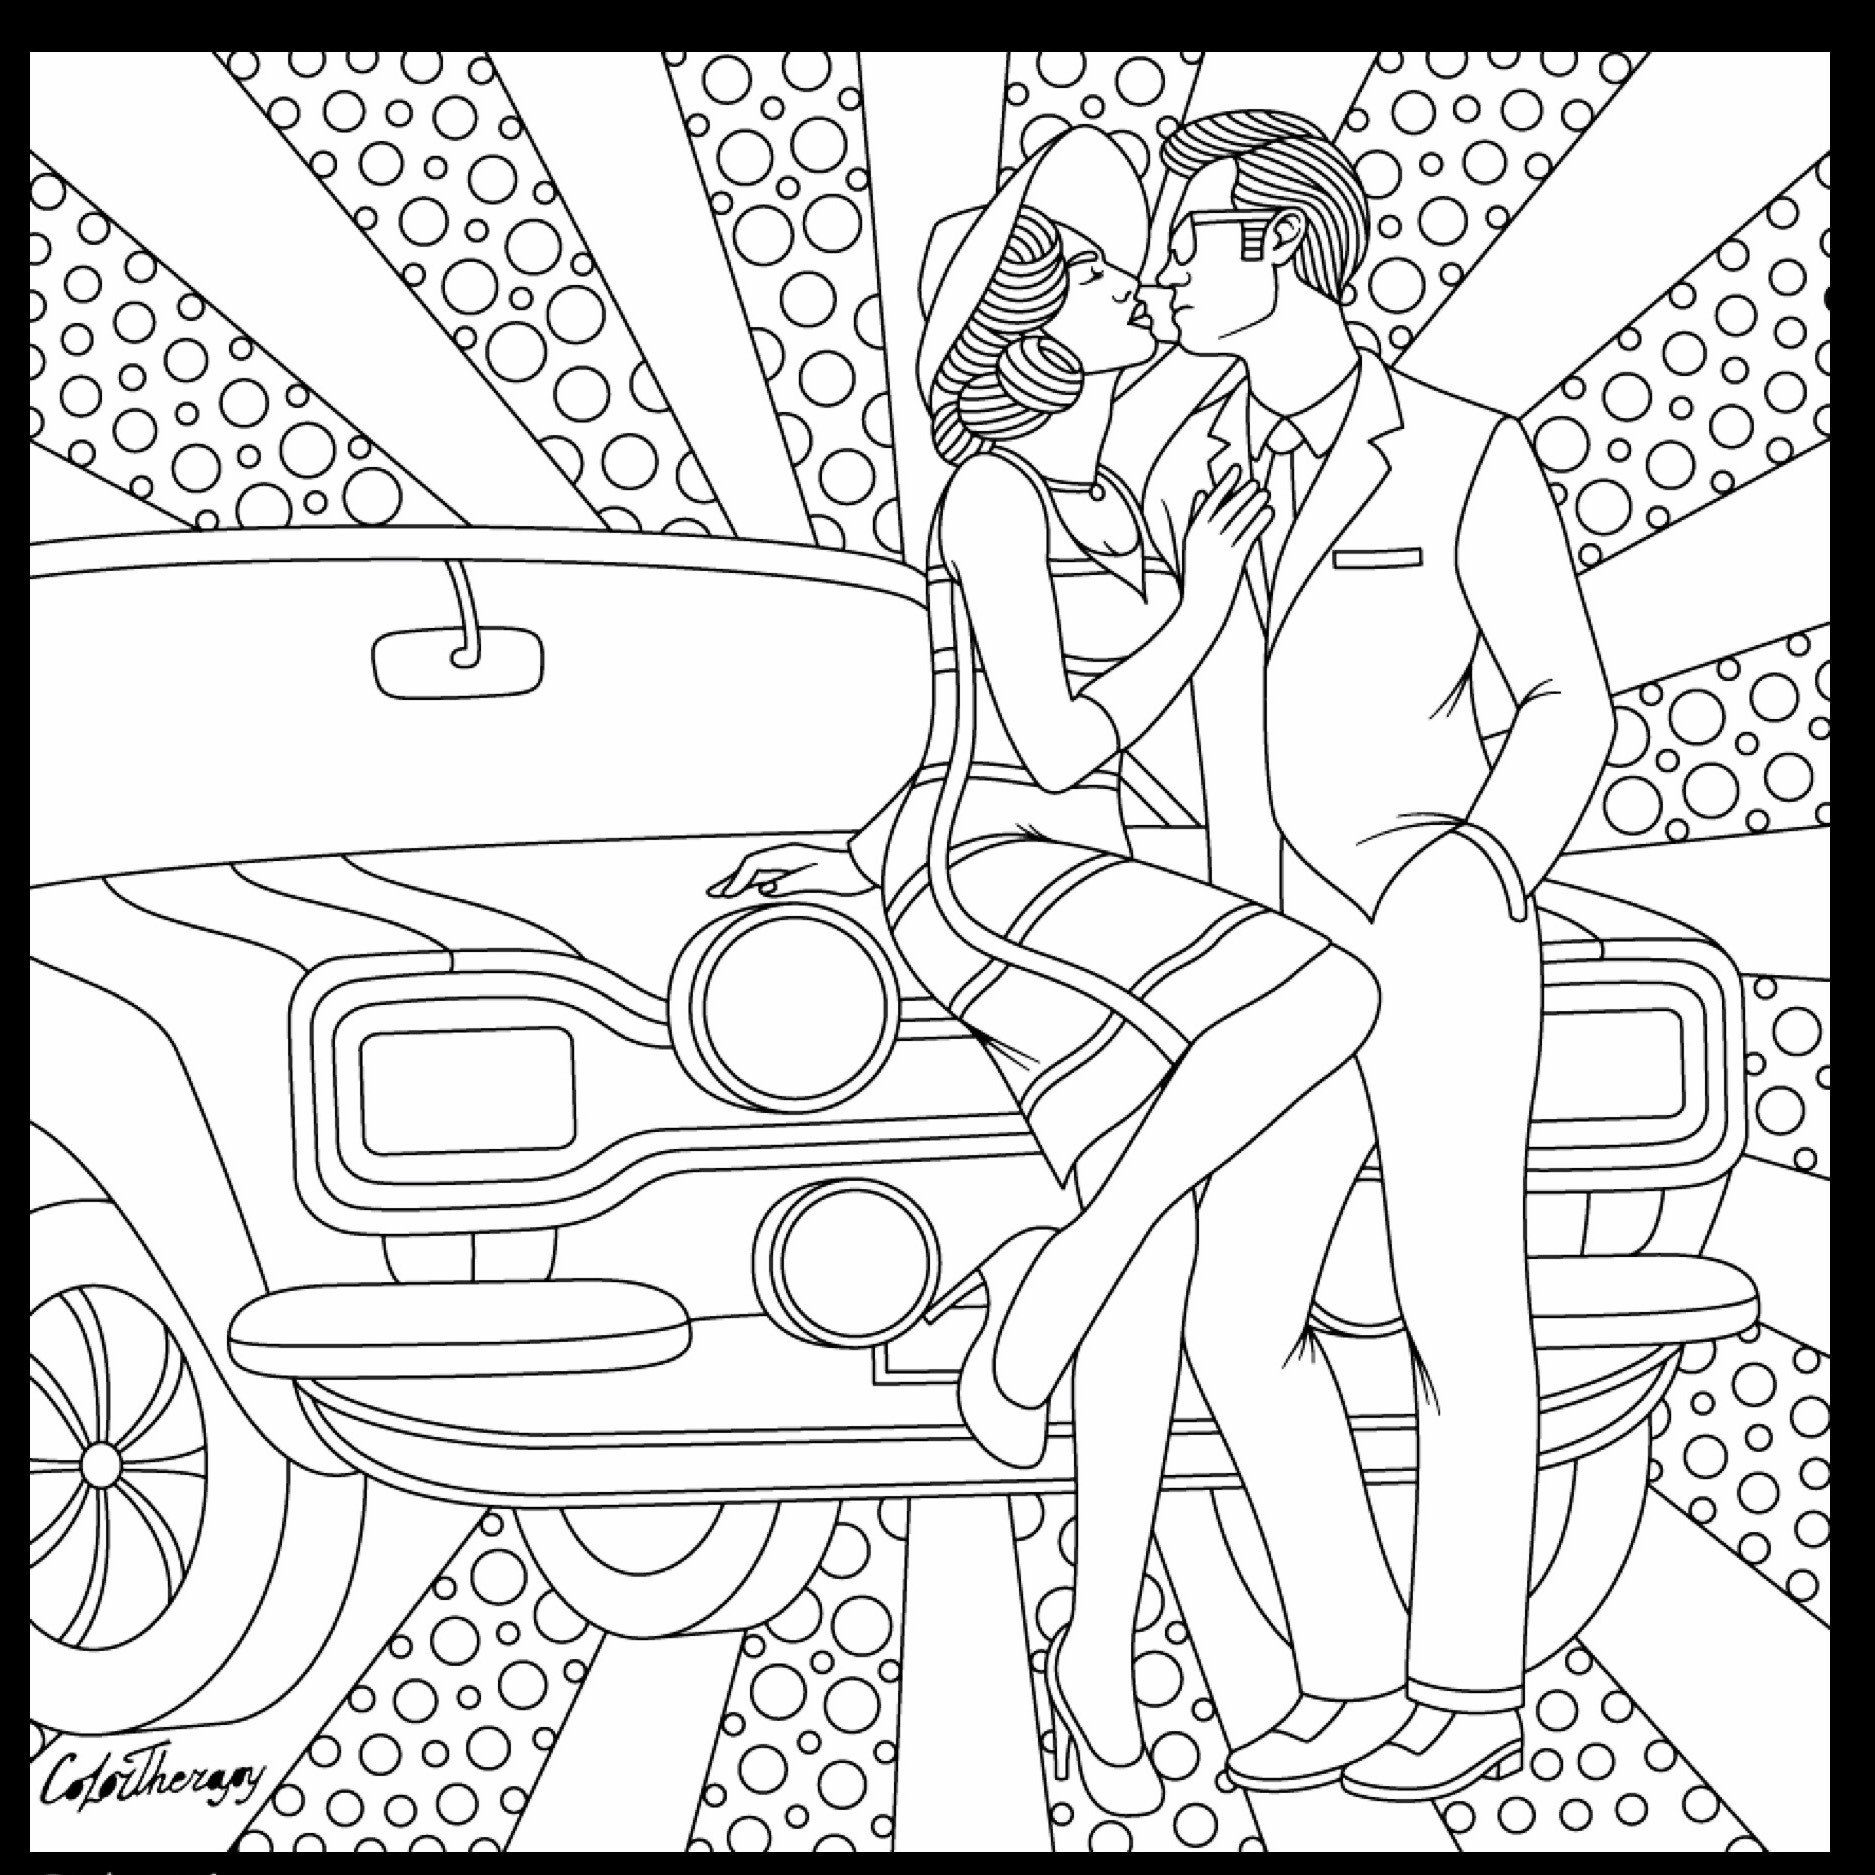 1950 Coloring Pages At GetColorings Free Printable Colorings 